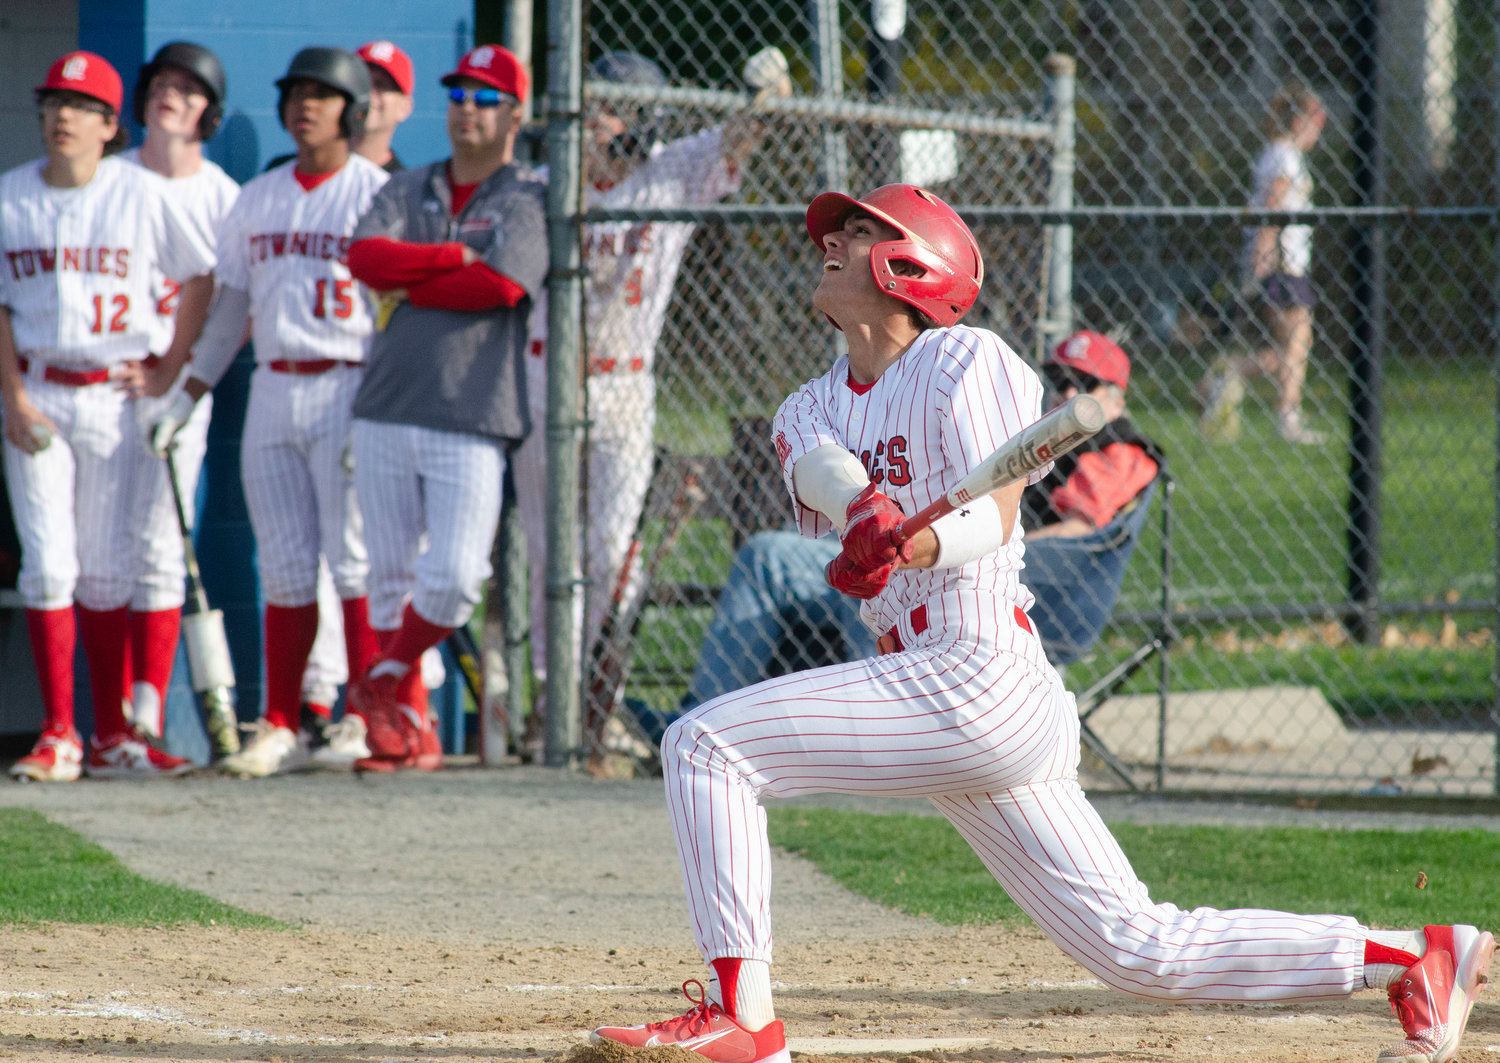 Jack McKnight smacks a fly ball during the Townies' recent game in Barrington Wednesday, April 13.